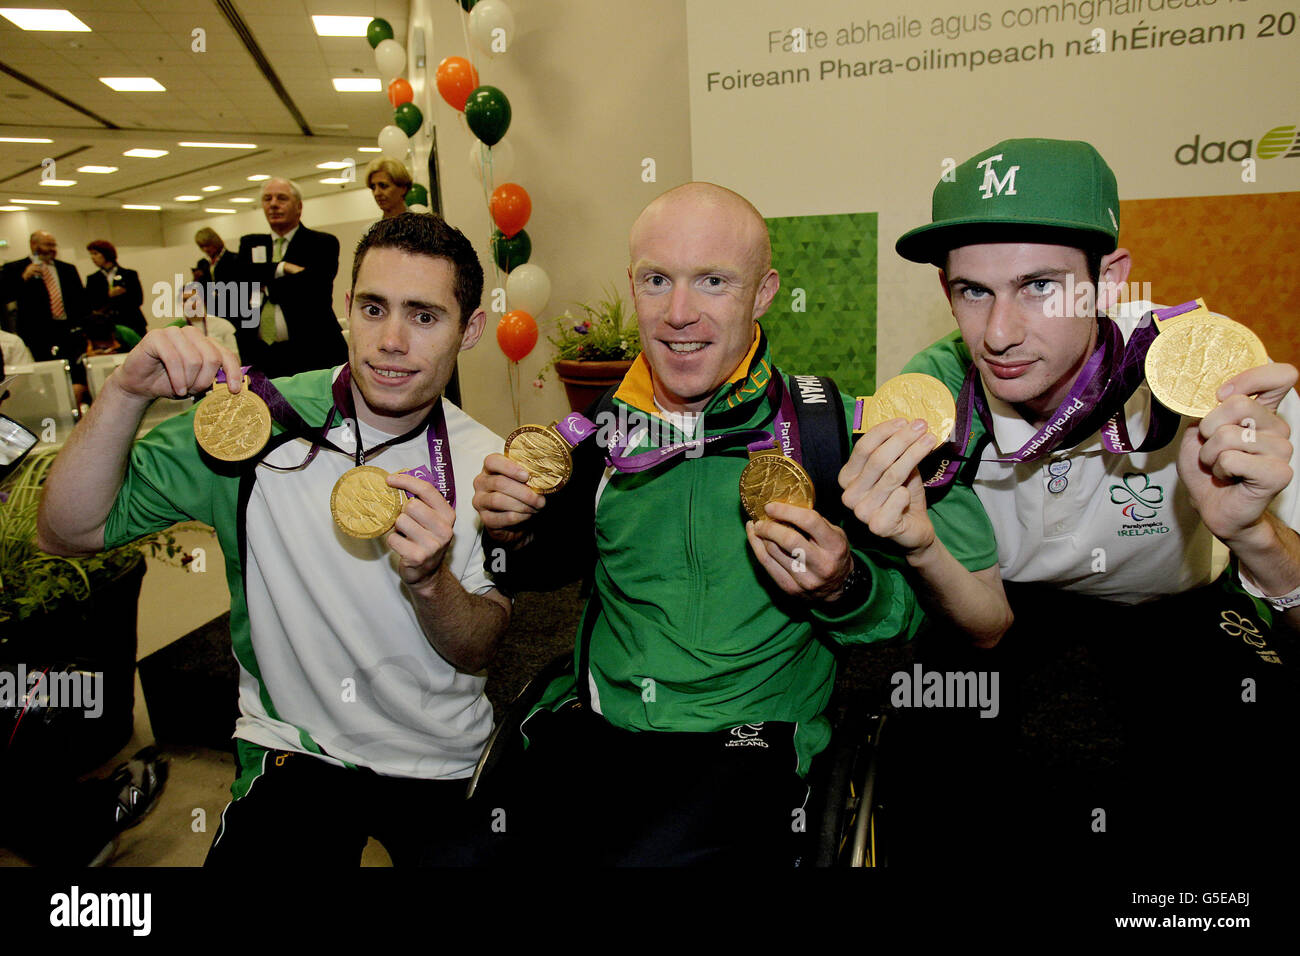 Double Gold medal winners at the London 2012 Paralympic Games Jason Smyth, Mark Rohan and Michael McKillop (L-R) arrive back into Dublin Airport to a massive welcome after the team's fantastic medal haul at the games. Stock Photo